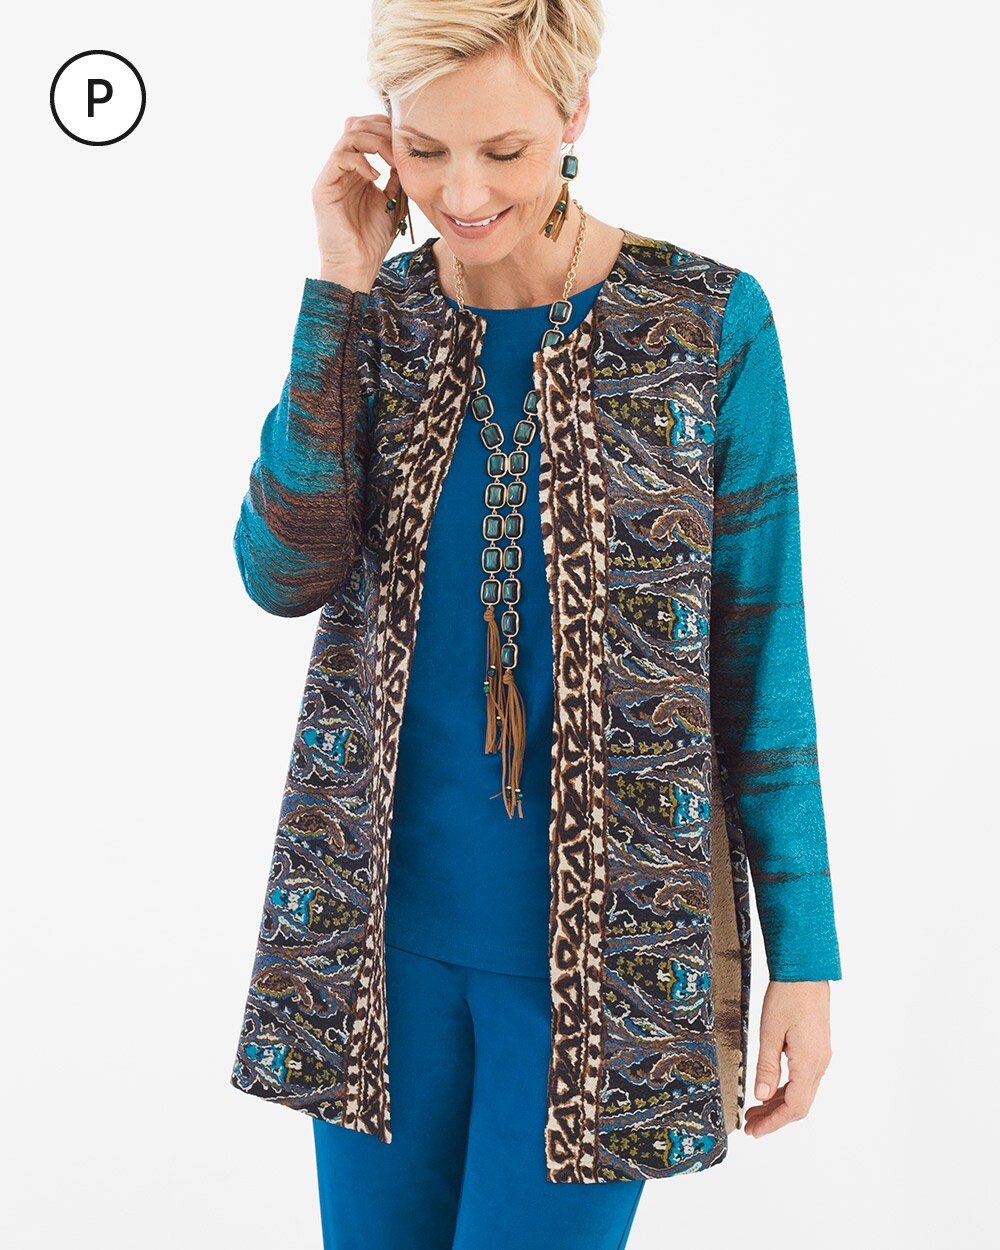 Travelers Collection Petite Crushed Paisley Jacket